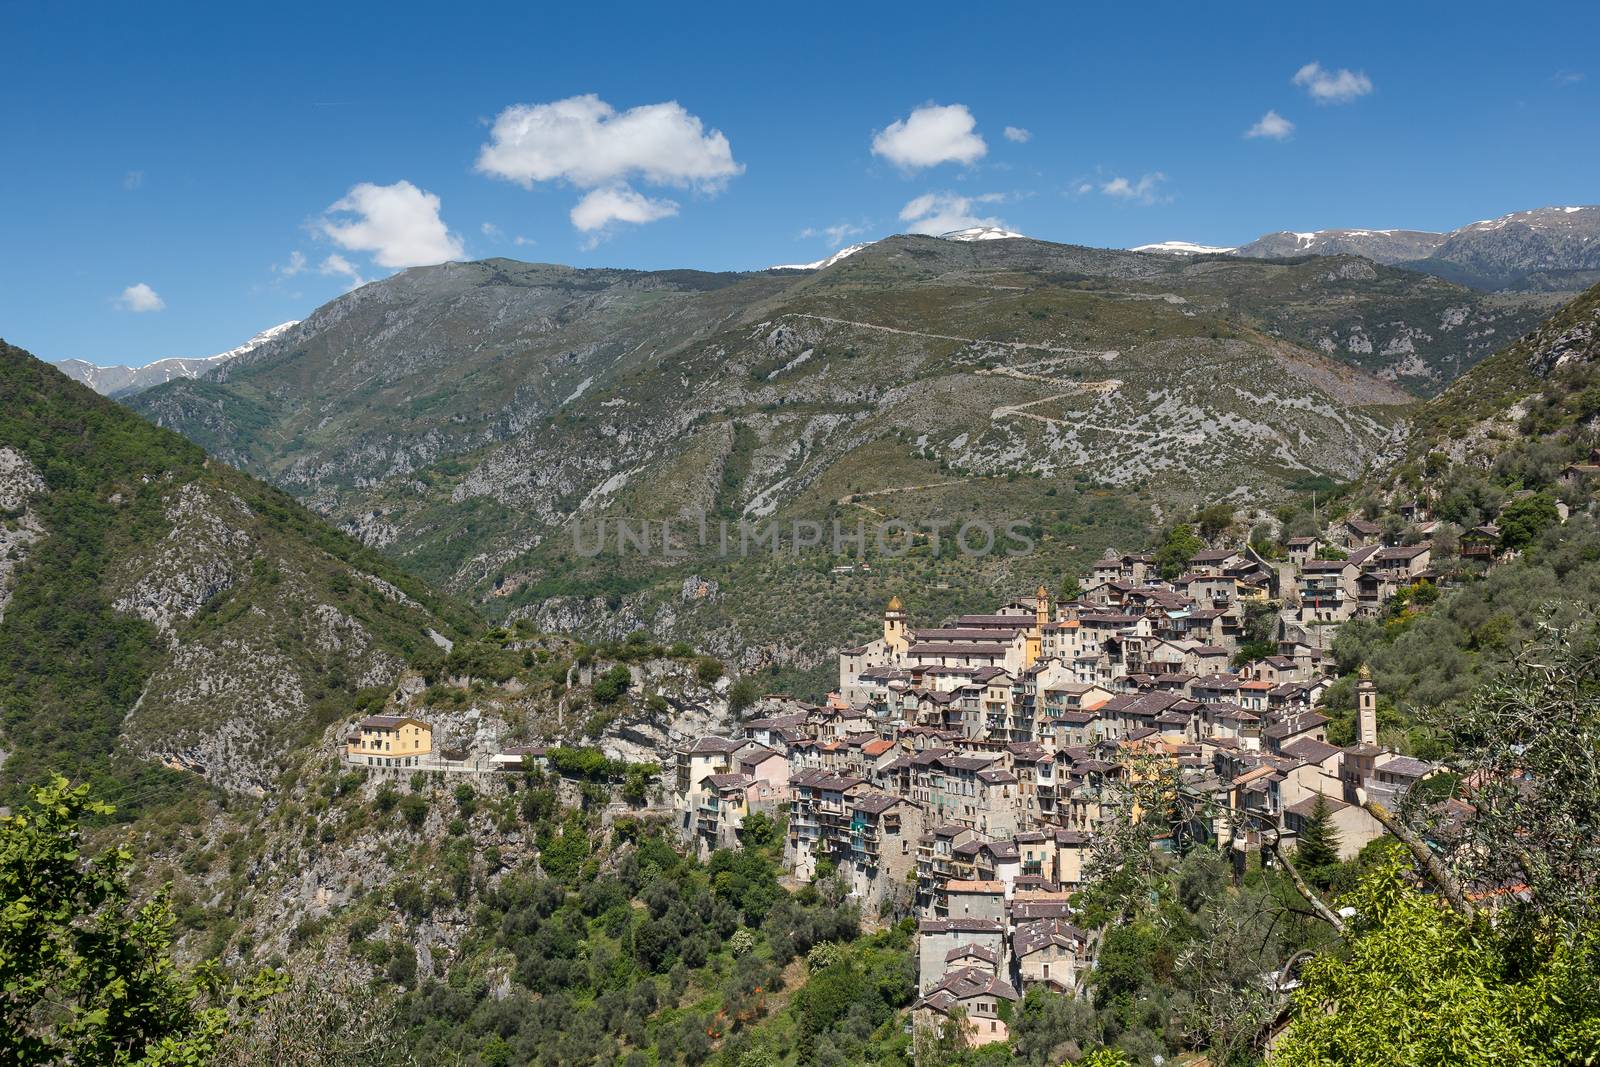 Saorge is a village in a stunning location inland from the French Riviera region around Menton